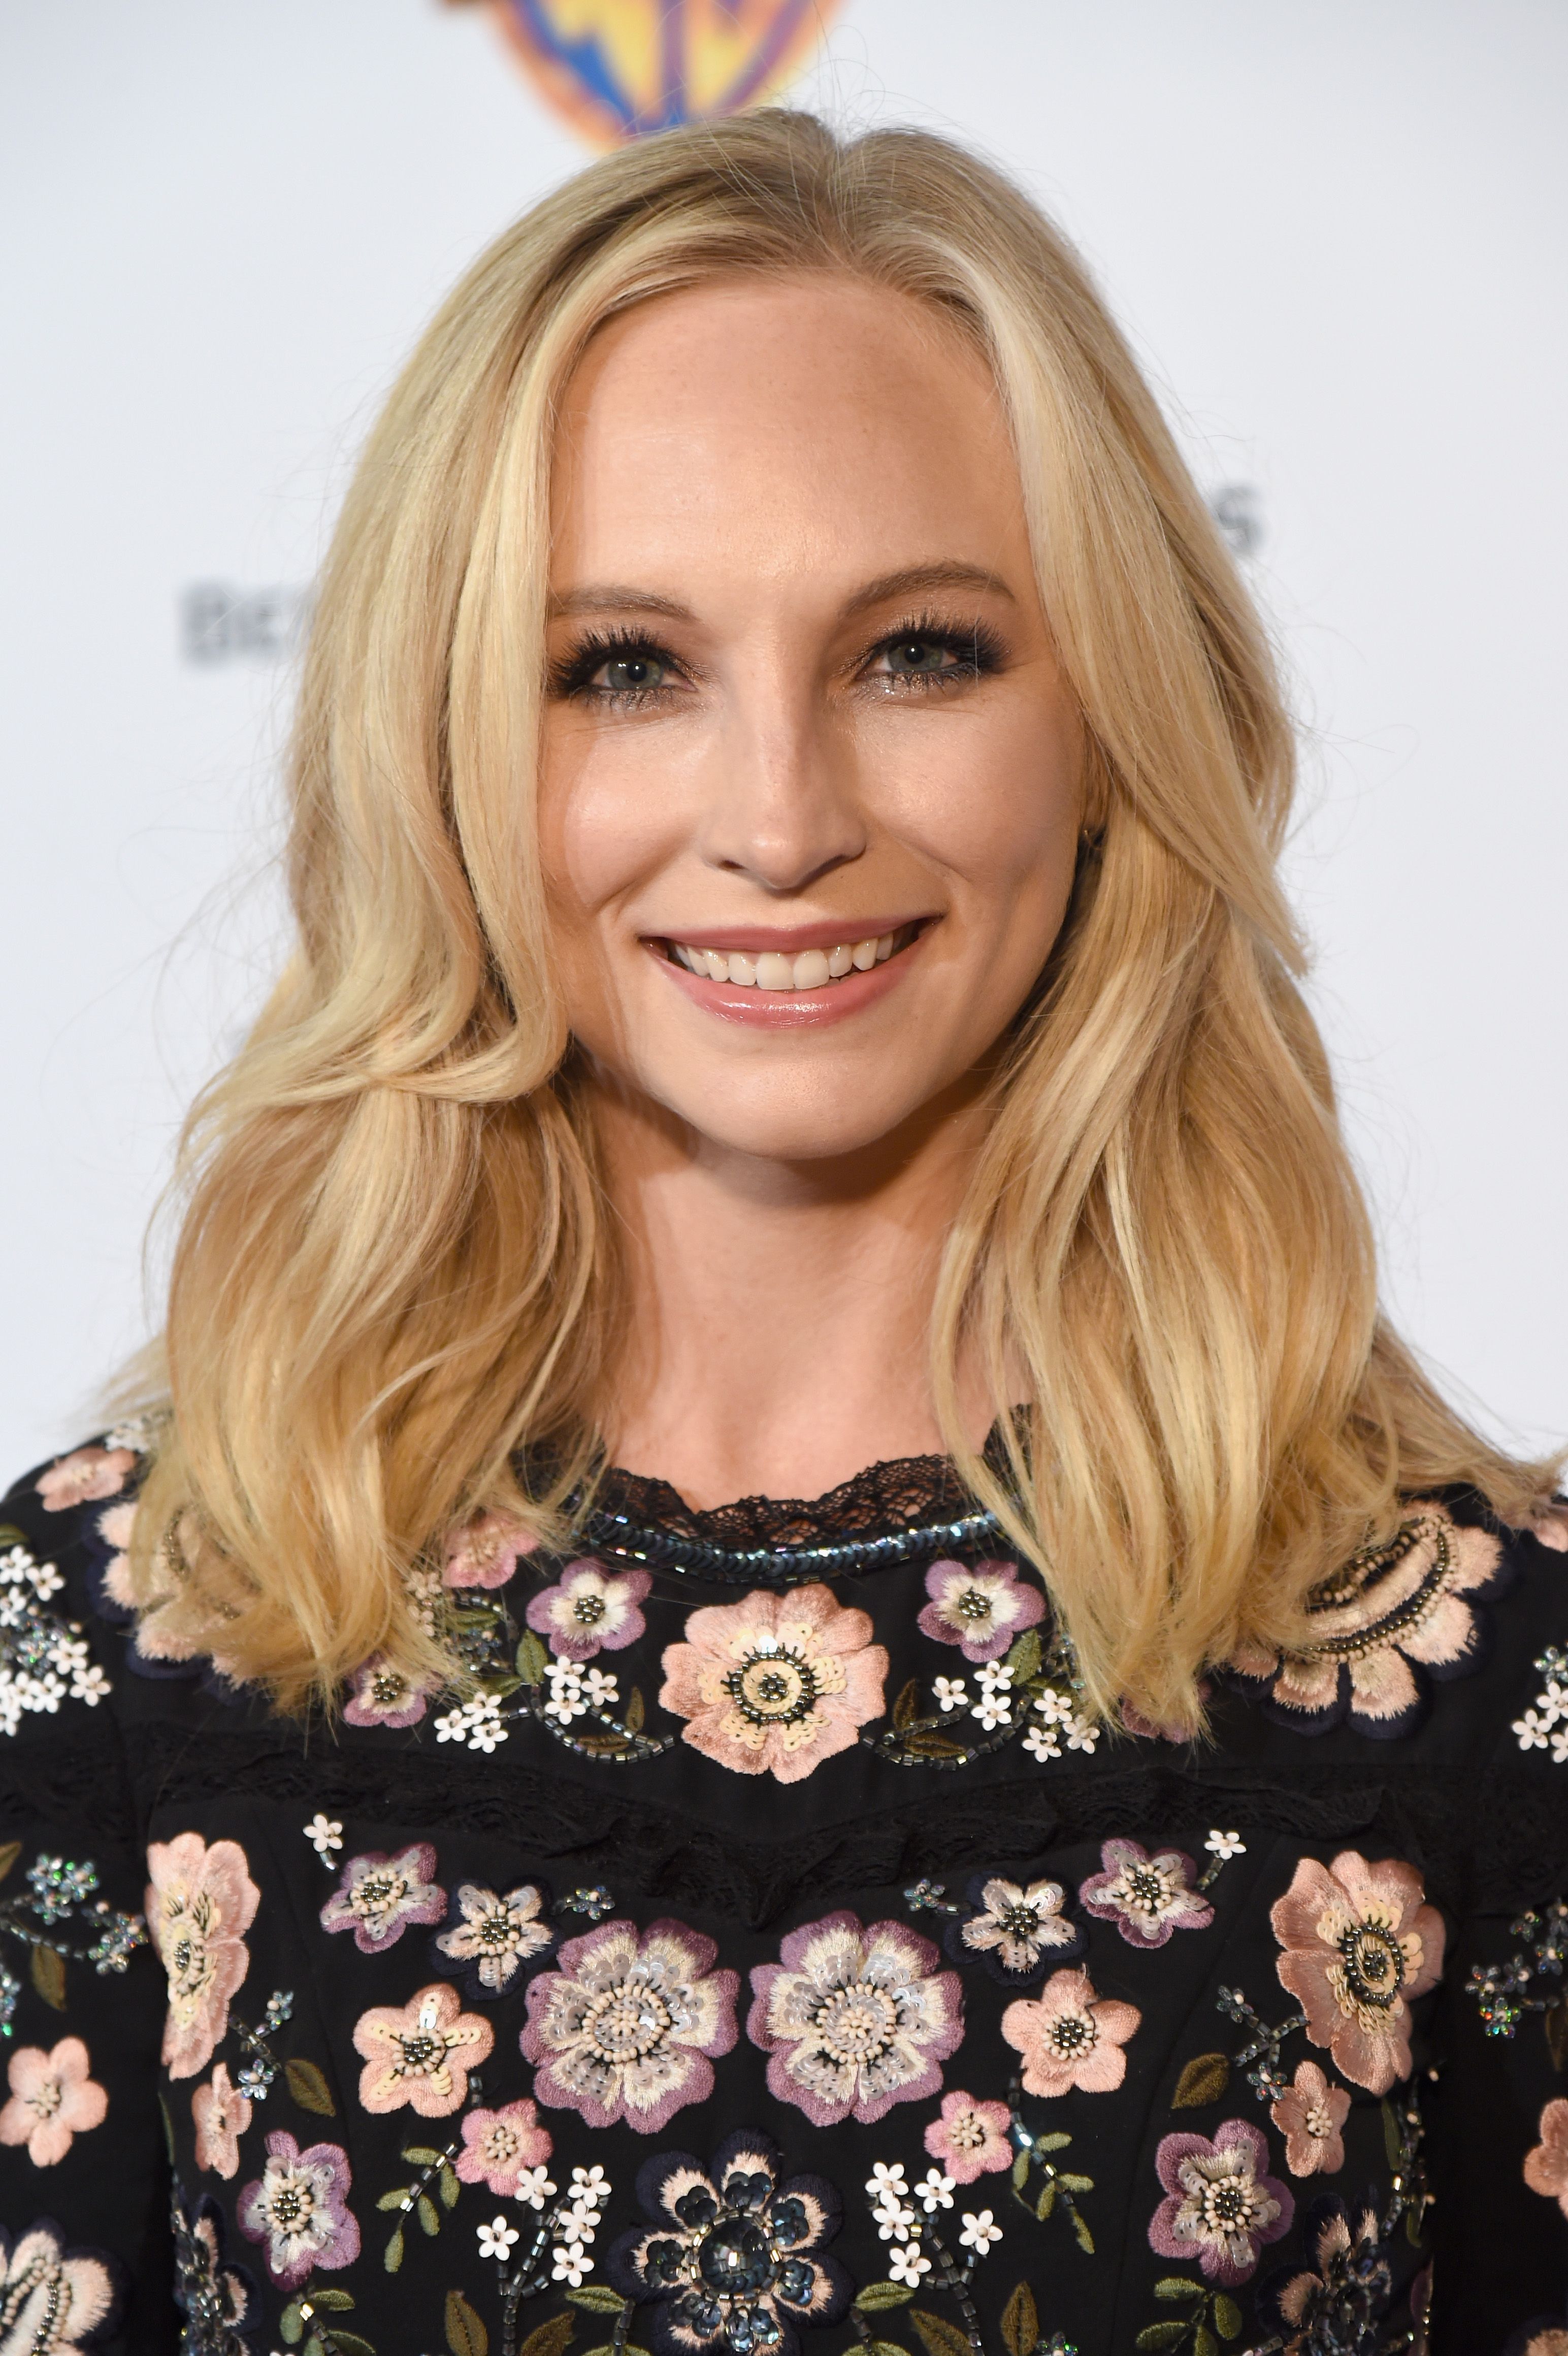 Candice King during the Barbara Berlanti Heroes Gala Benefitting F Cancer at Warner Bros. Studios on October 13, 2018 in Burbank, California. | Source: Getty Images